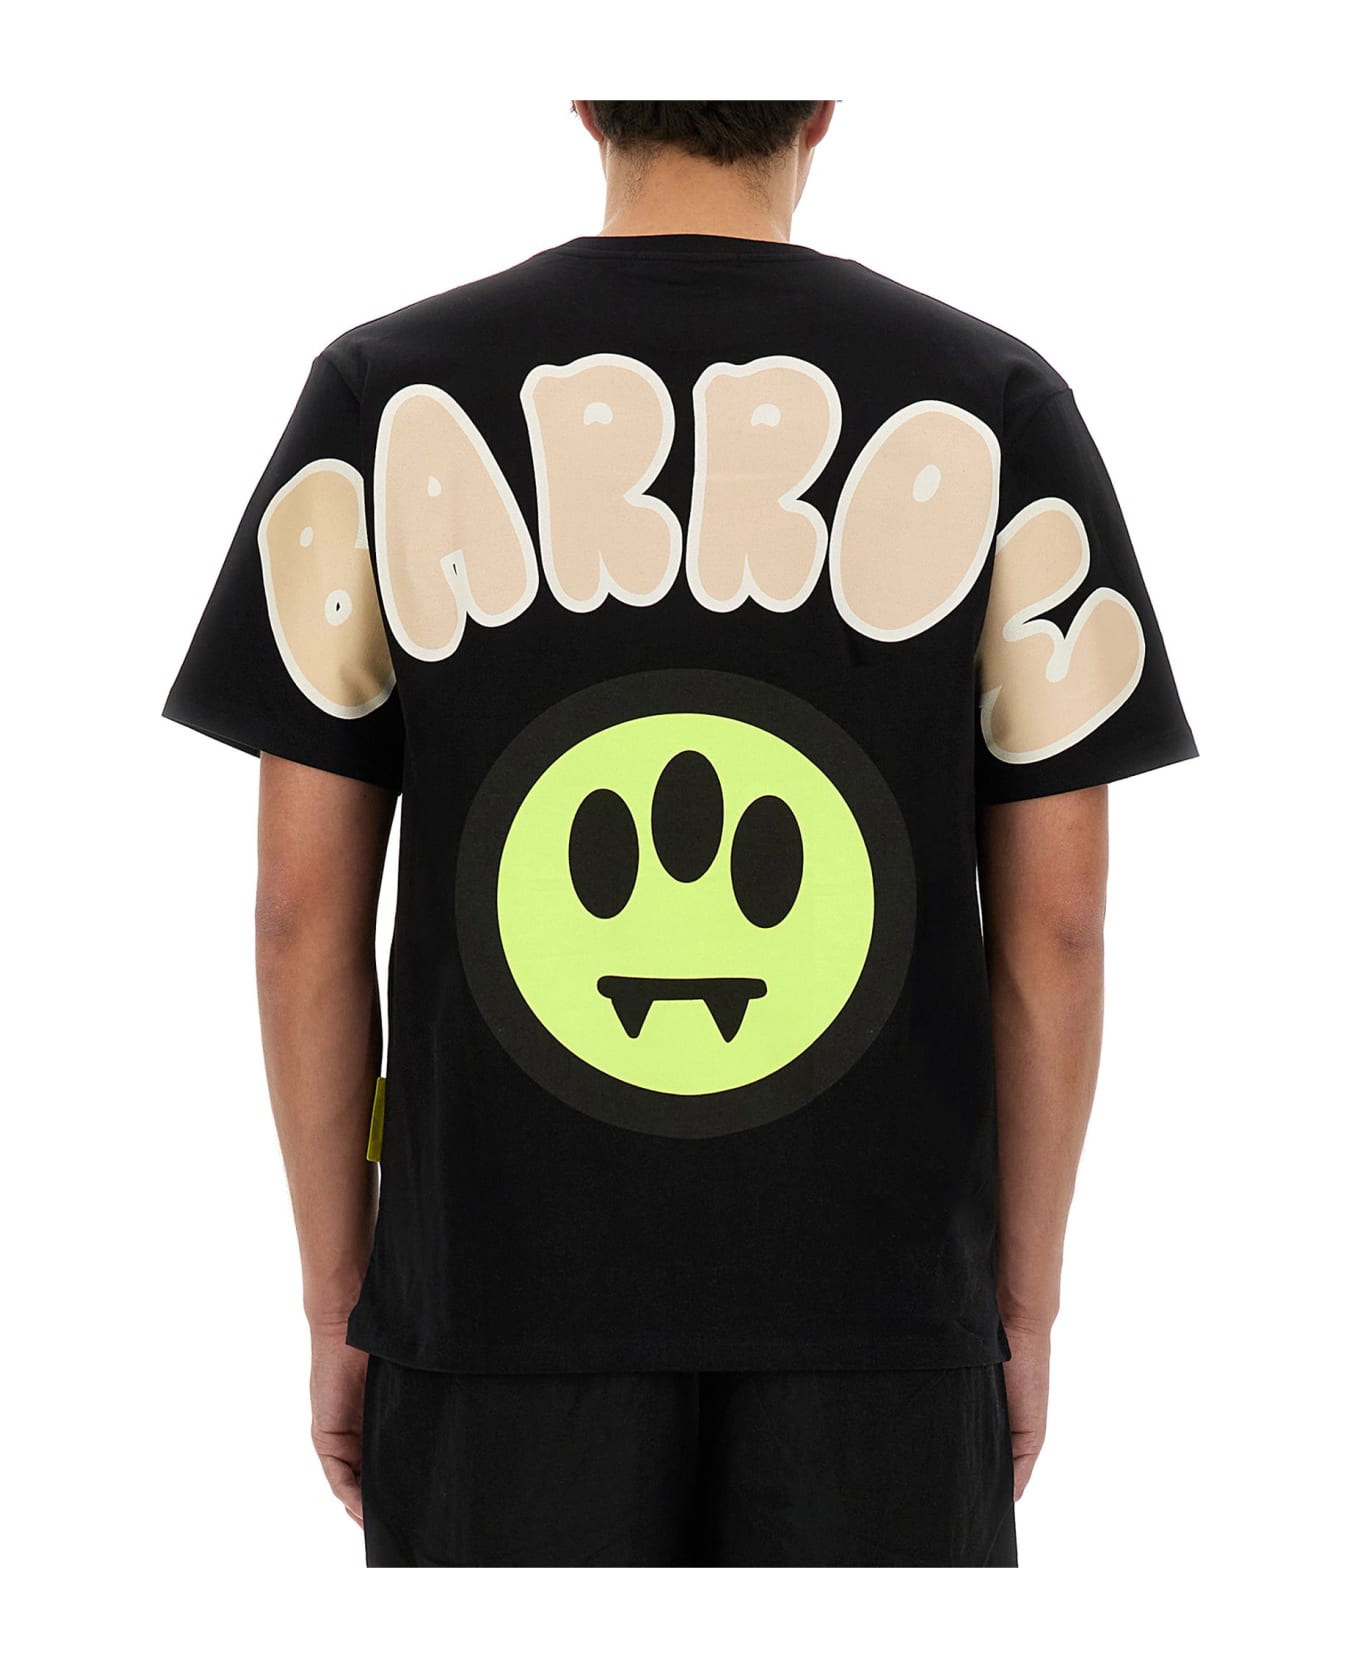 Barrow Black T-shirt With Front And Back Logo Print - Black